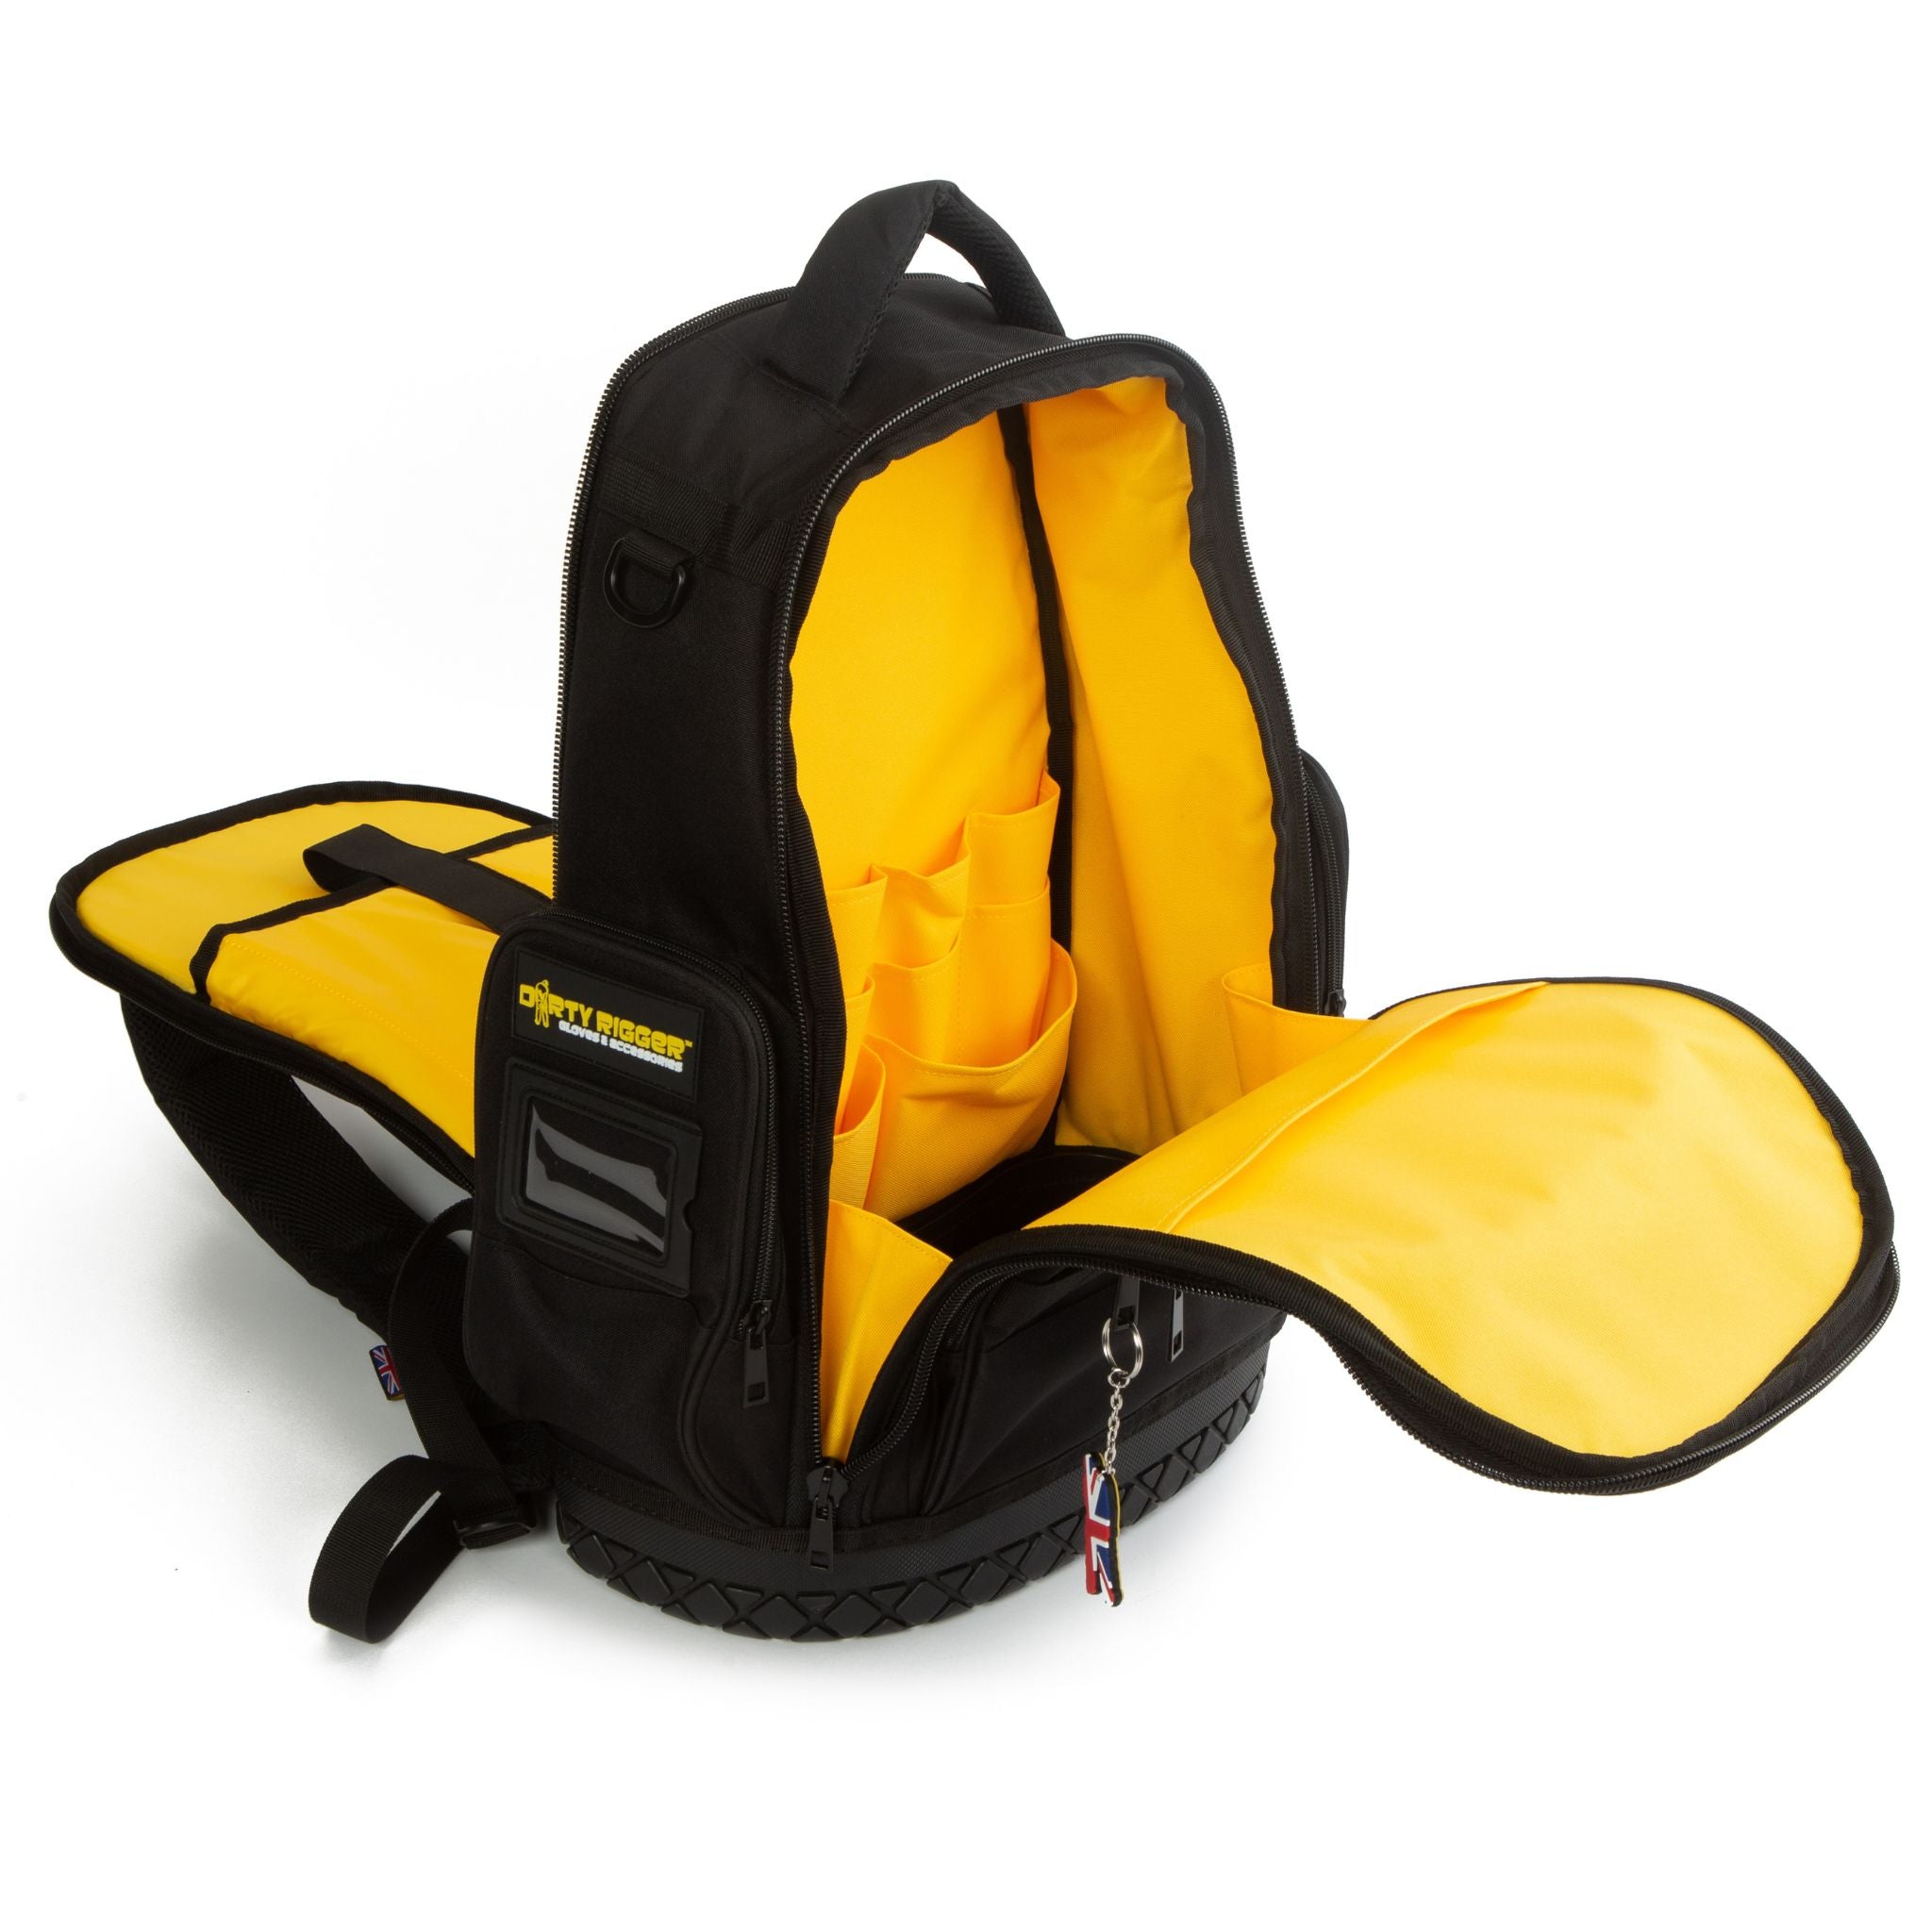 Technician backpack with hi-visibility interior